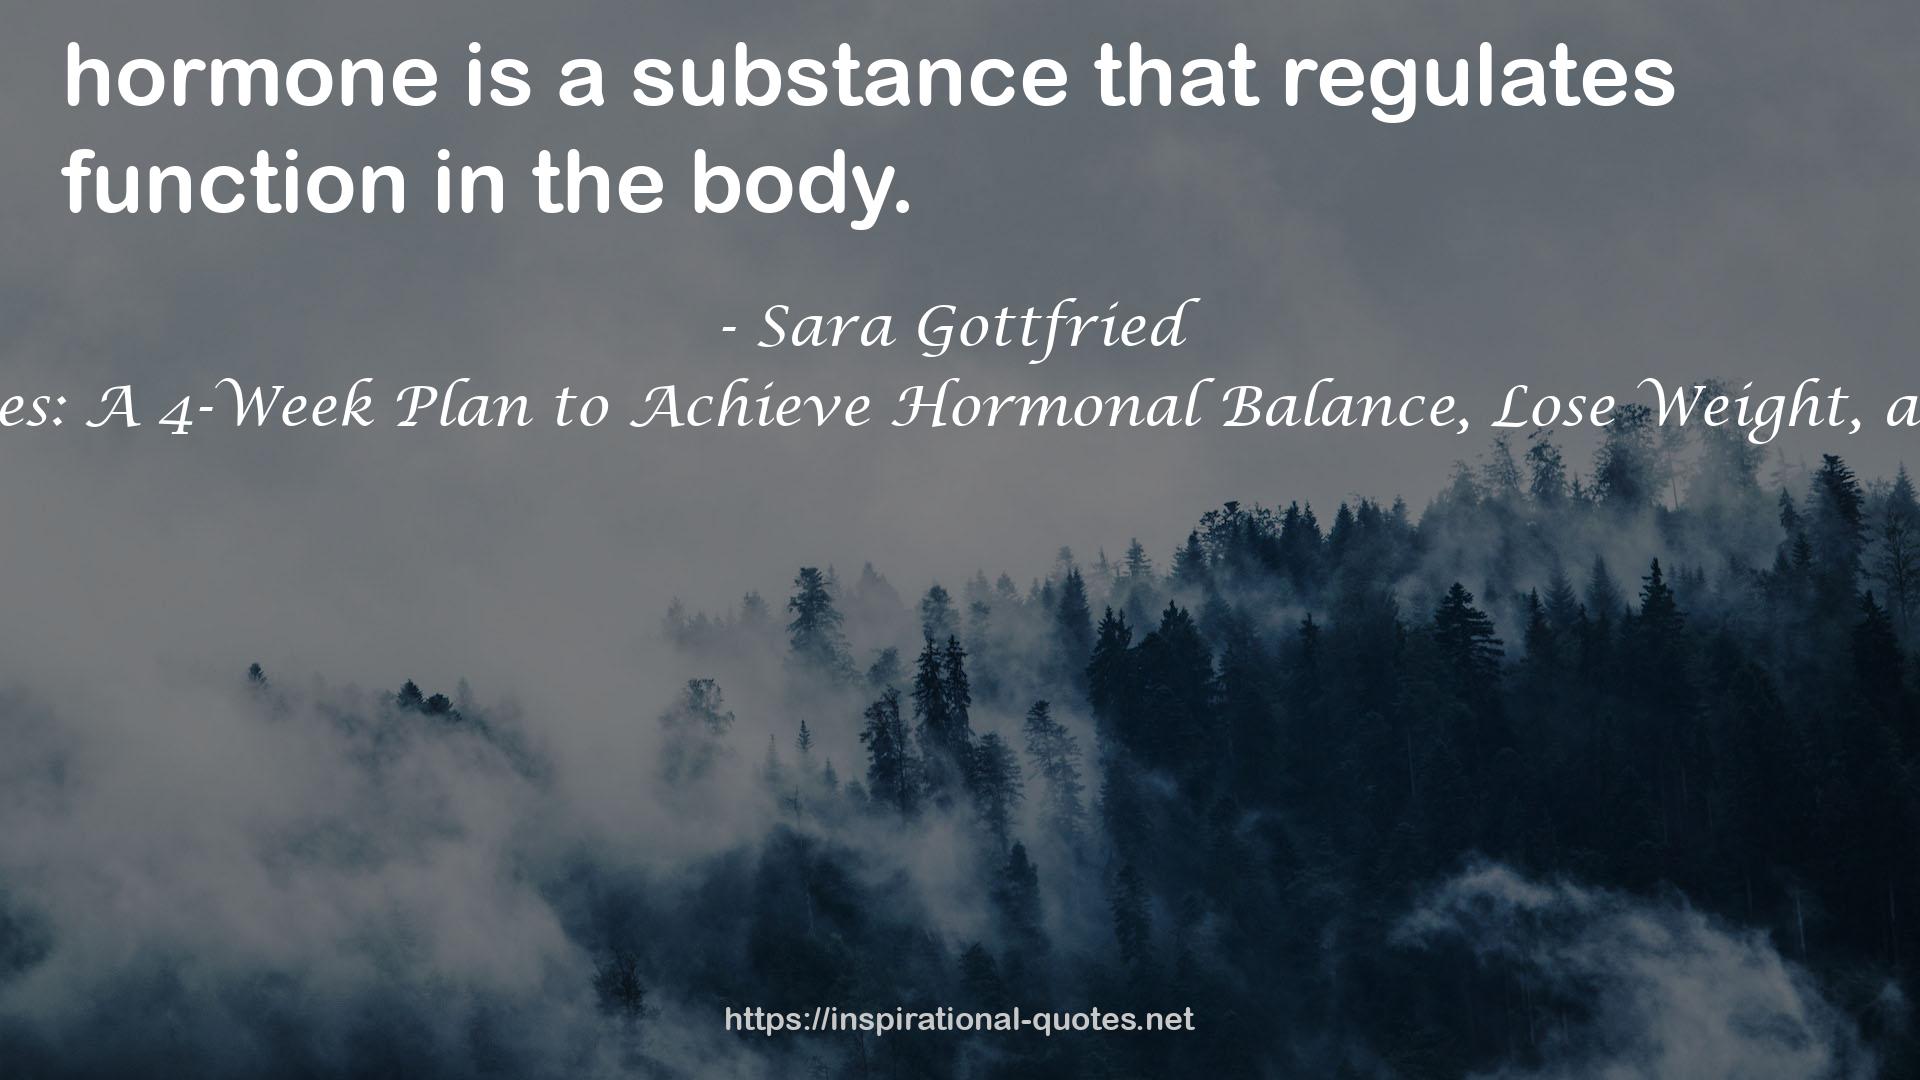 Women, Food, and Hormones: A 4-Week Plan to Achieve Hormonal Balance, Lose Weight, and Feel Like Yourself Again QUOTES